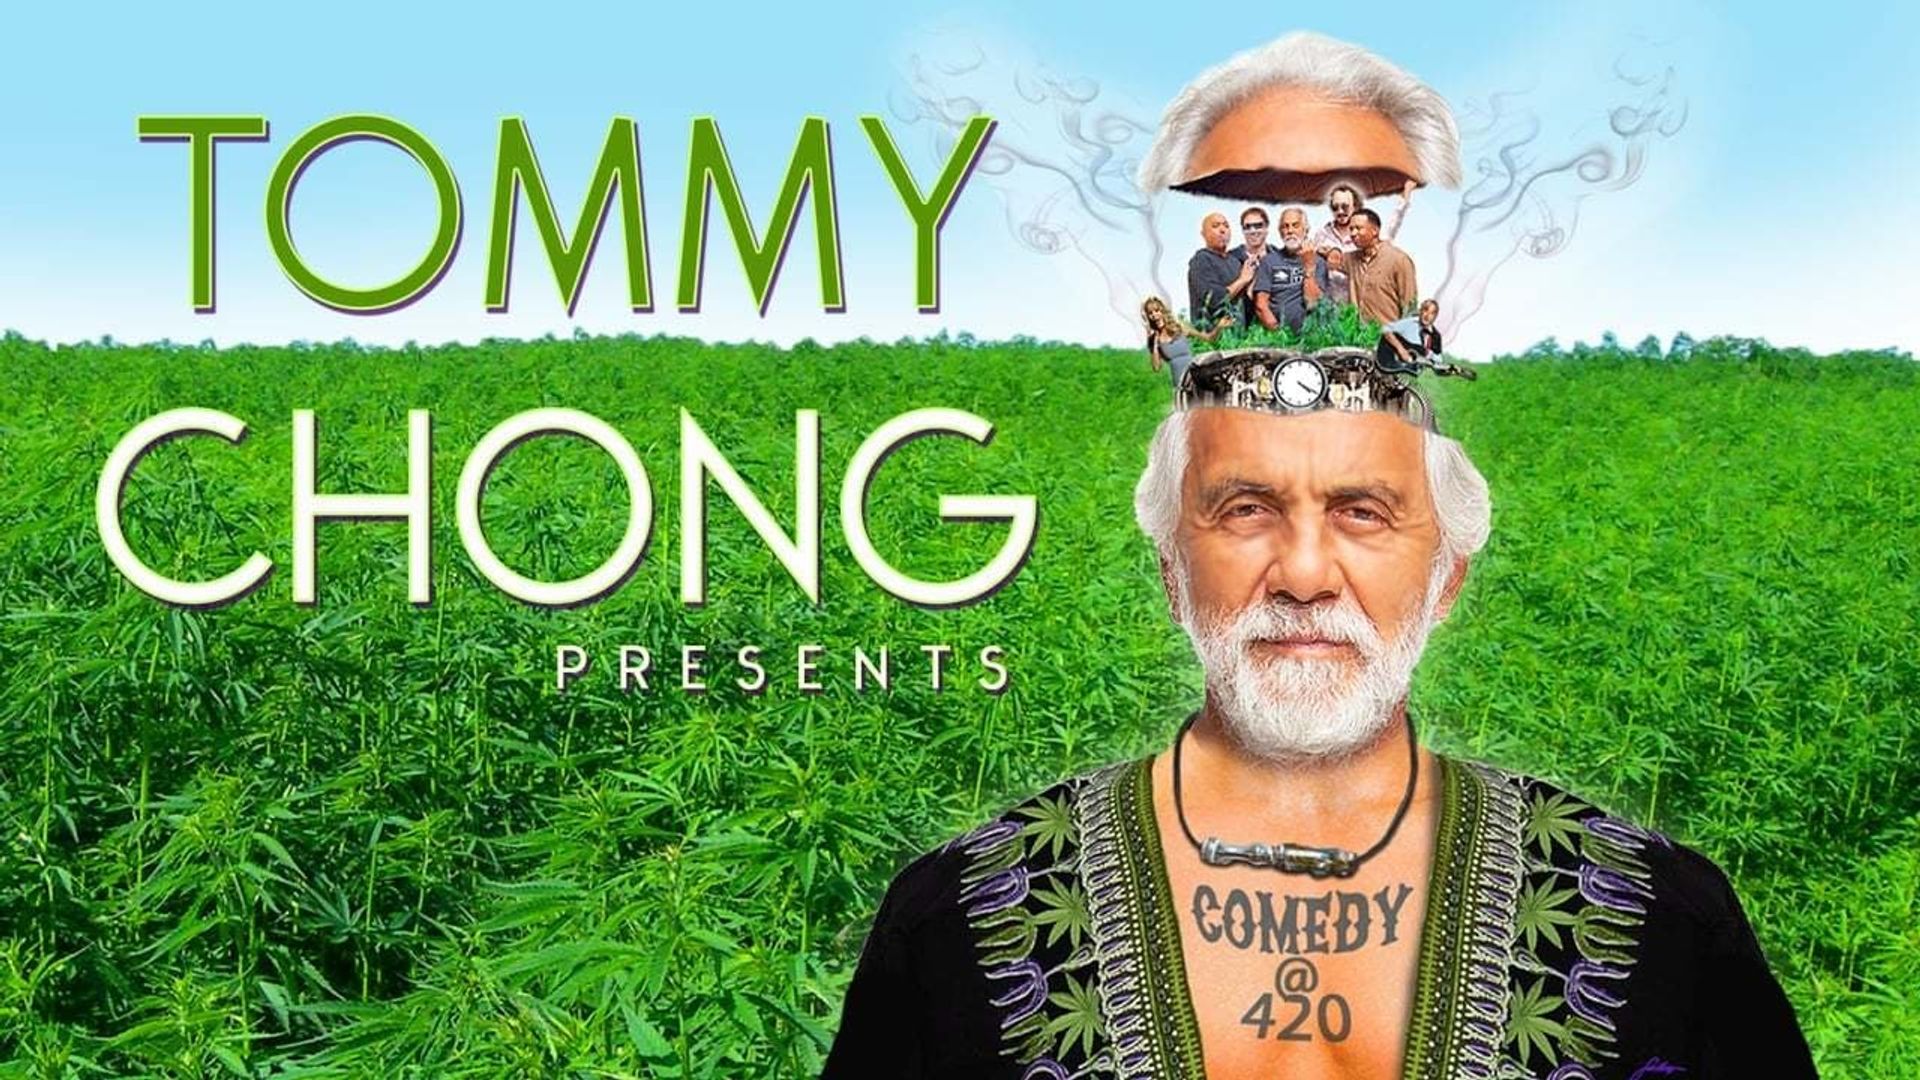 Tommy Chong Presents Comedy at 420 background